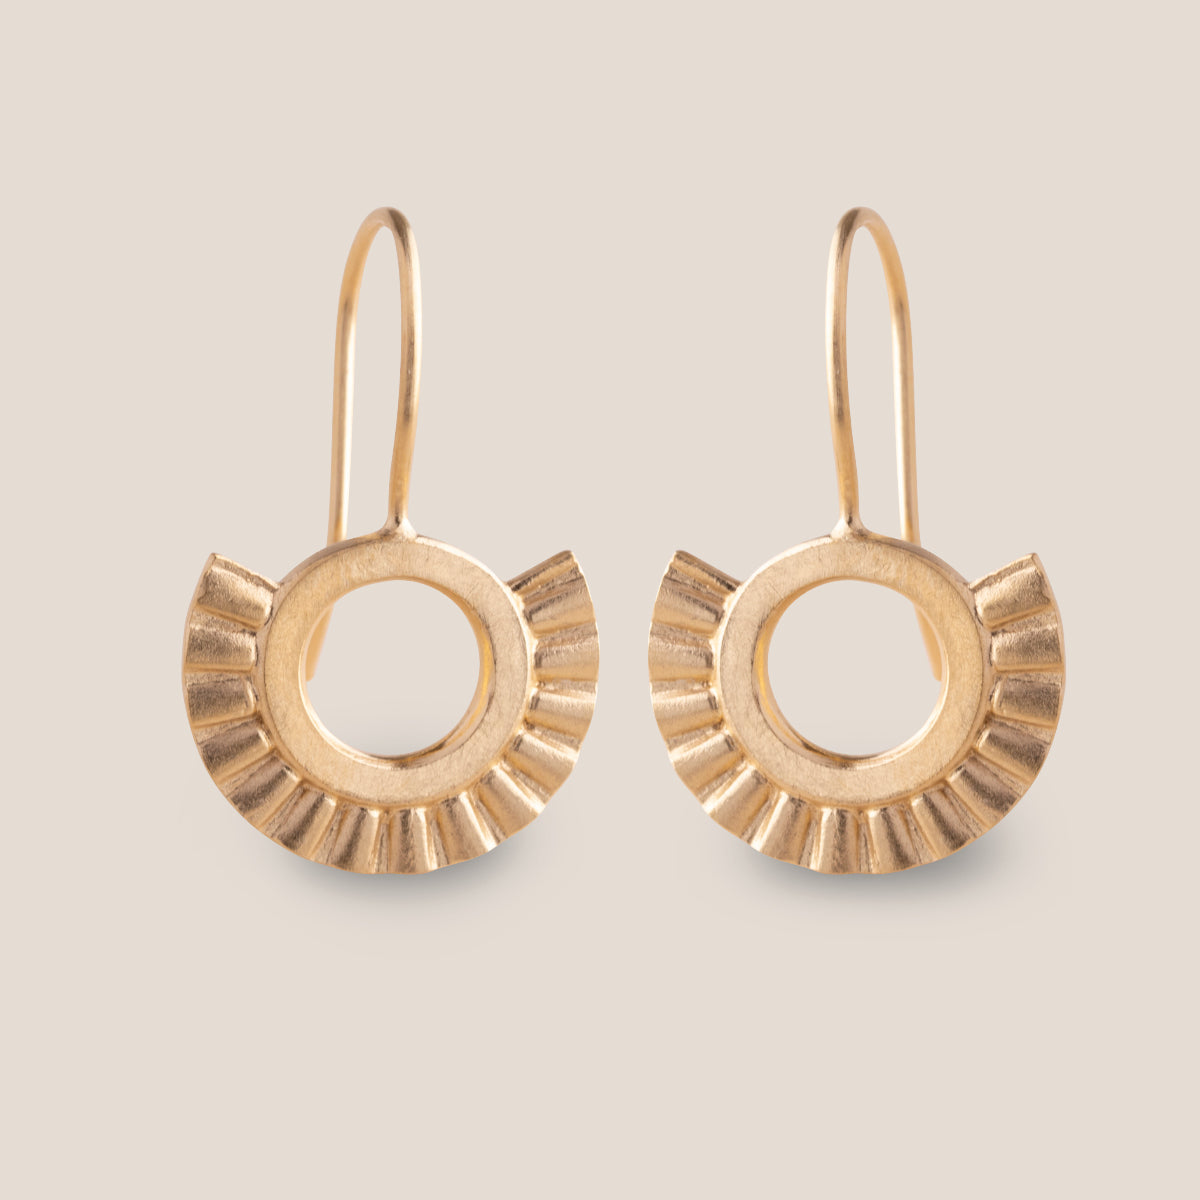 NEW - Sunray Drop Earrings - Gold Plated